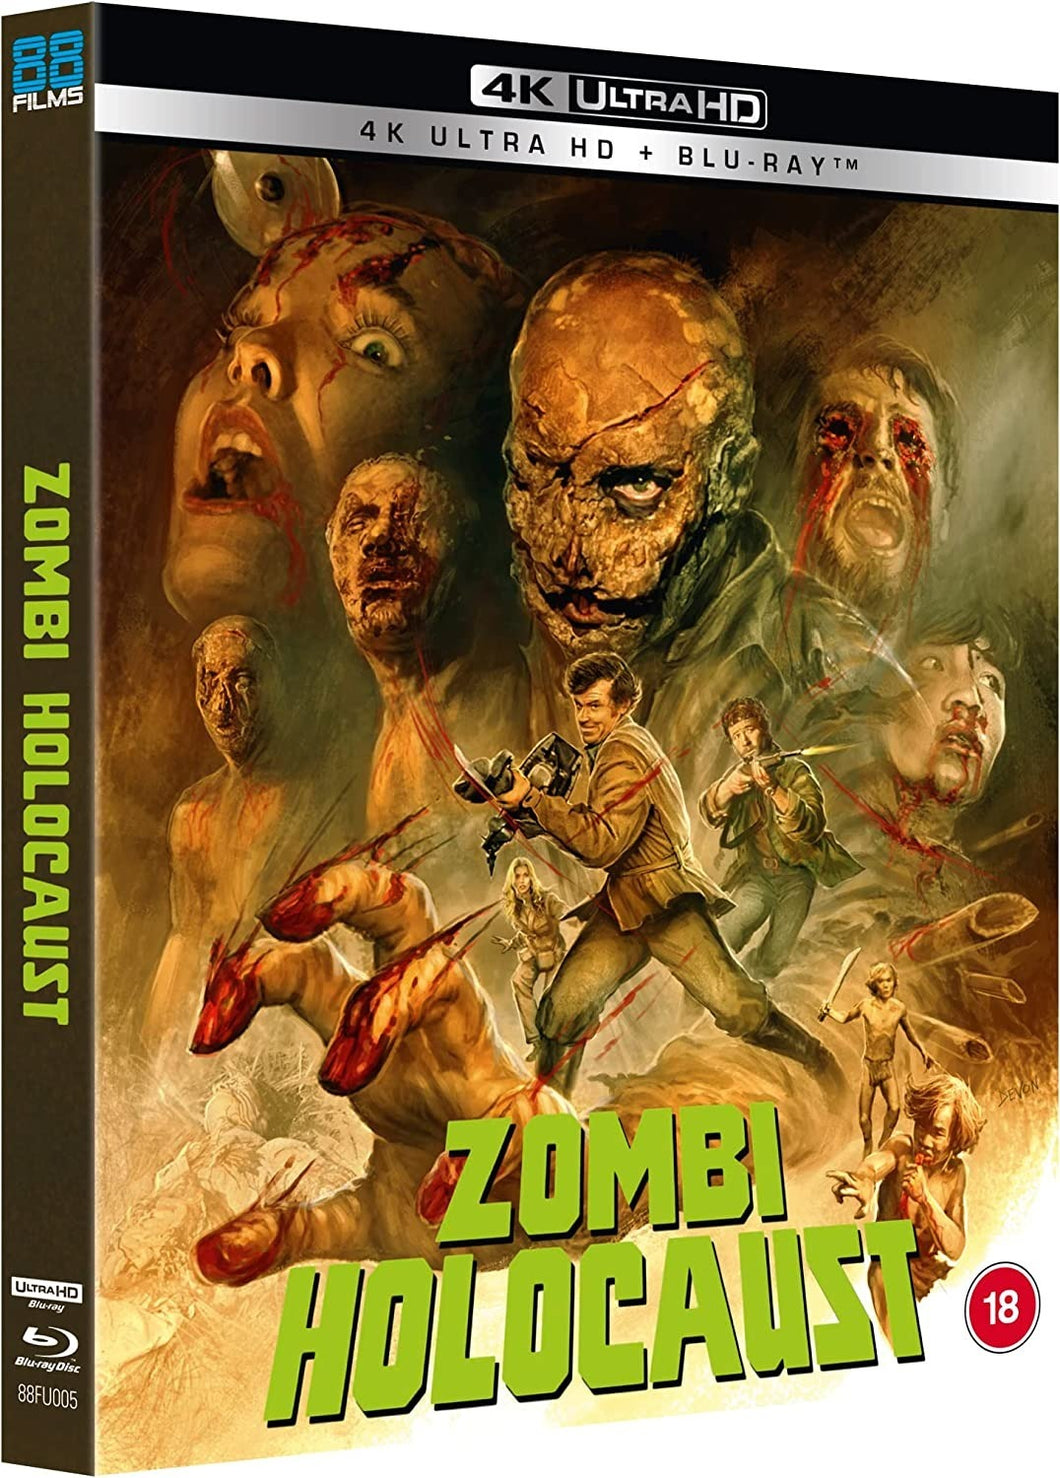 Zombi Holocaust 4K (1980) - front cover